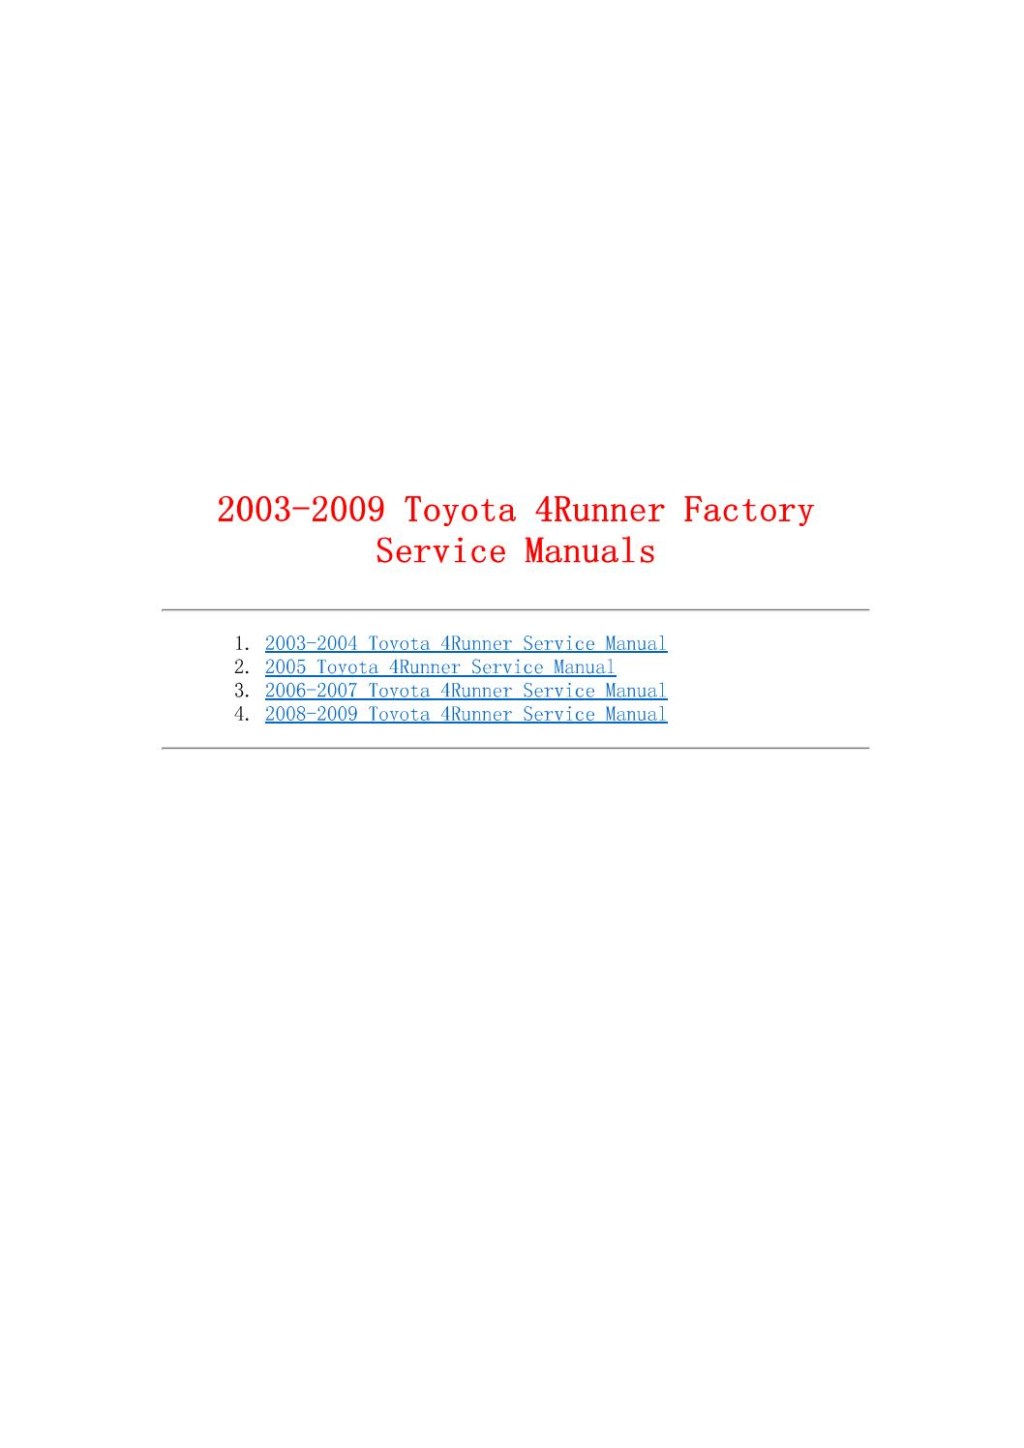 Picture of: TOYOTA RUNNER Service Repair Manual by 163686 – Issuu